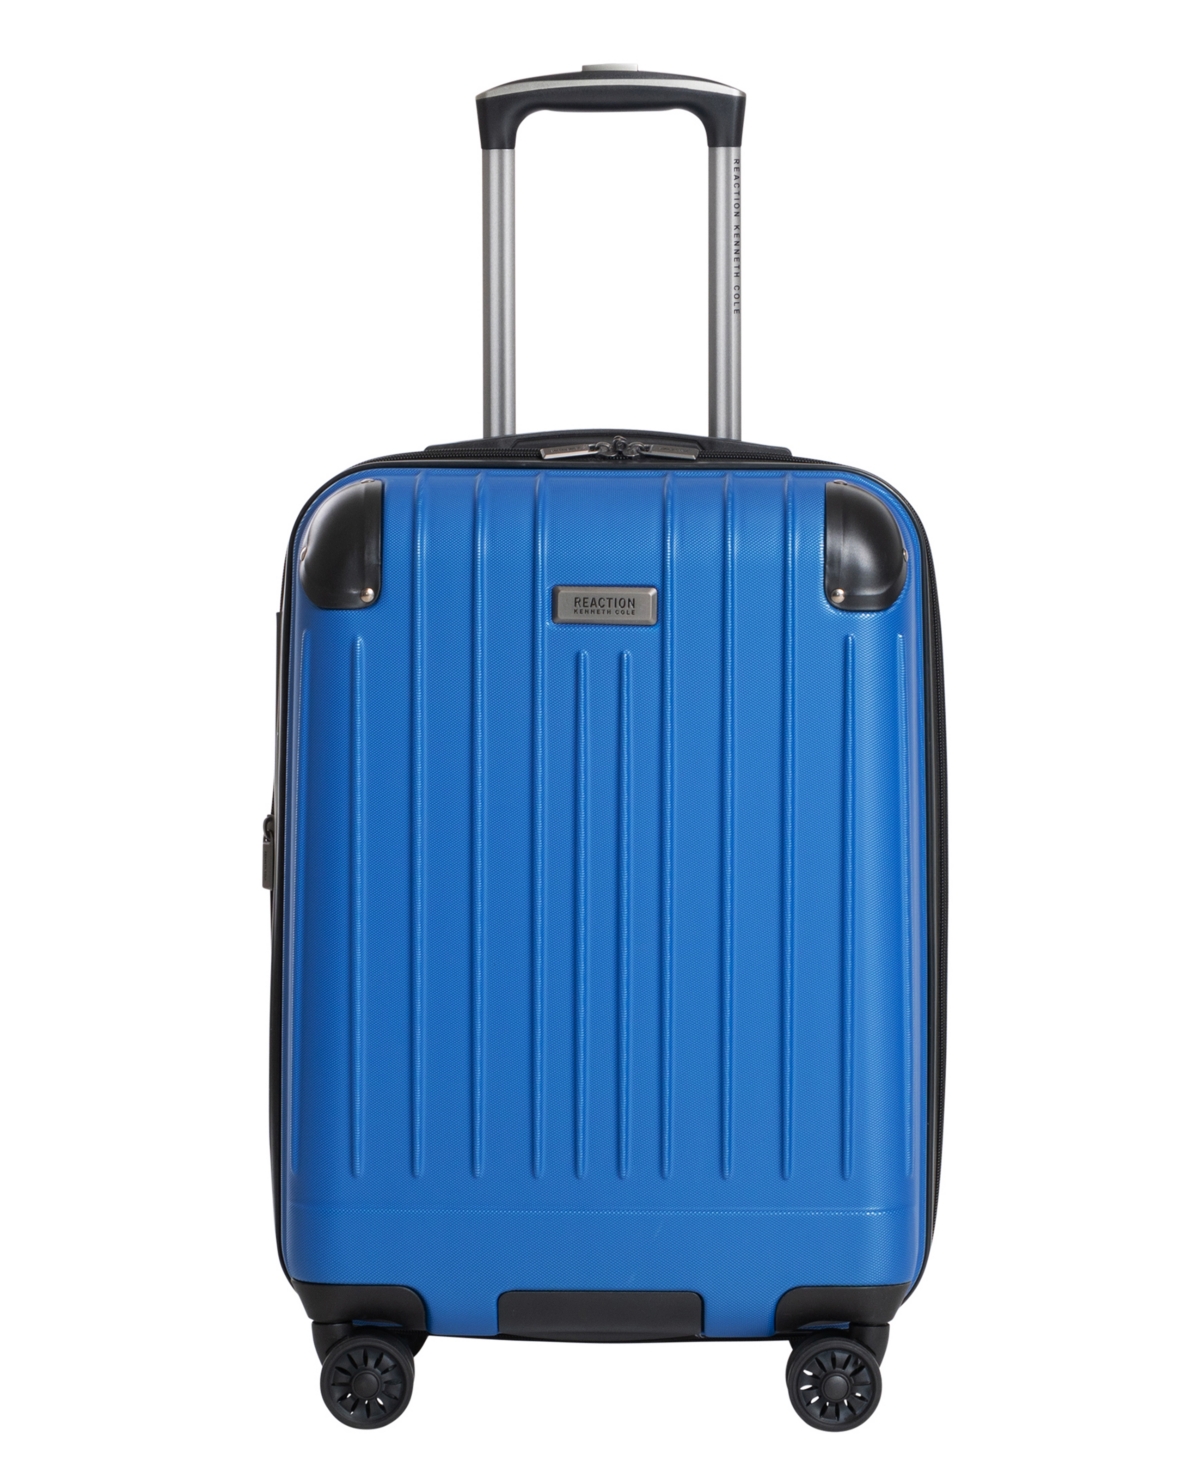 Kenneth Cole Reaction Flying Axis 20" Hardside Expandable Carry-on In Classic Blue